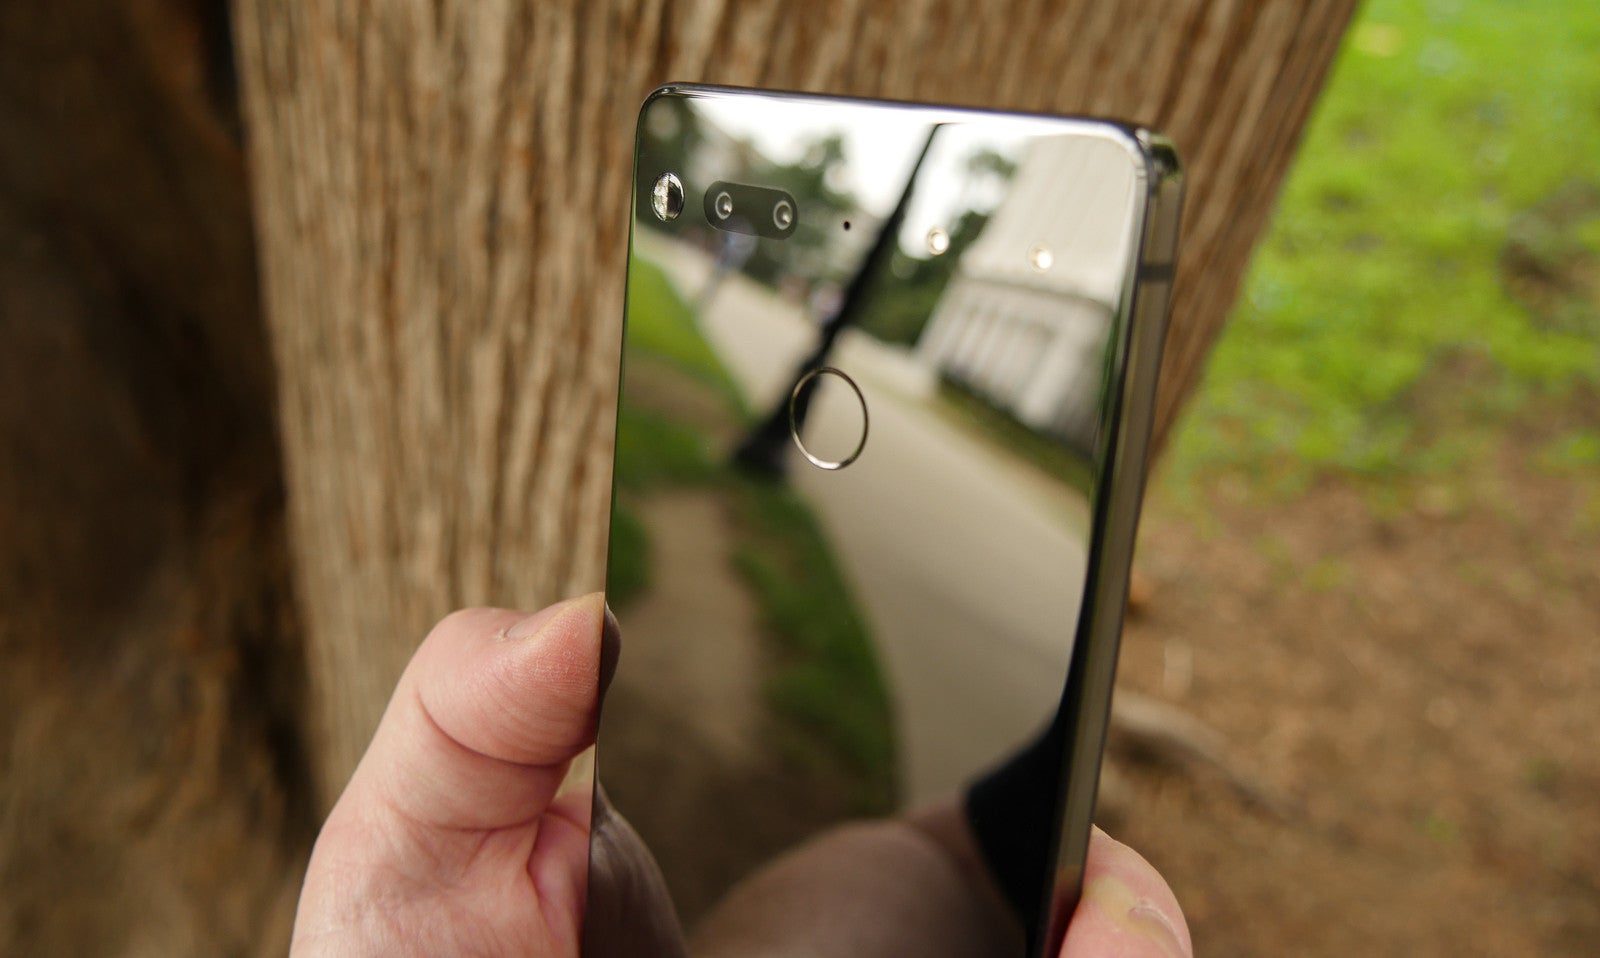 New Essential Phone update enables fingerprint sensor functionality, adds November security patch